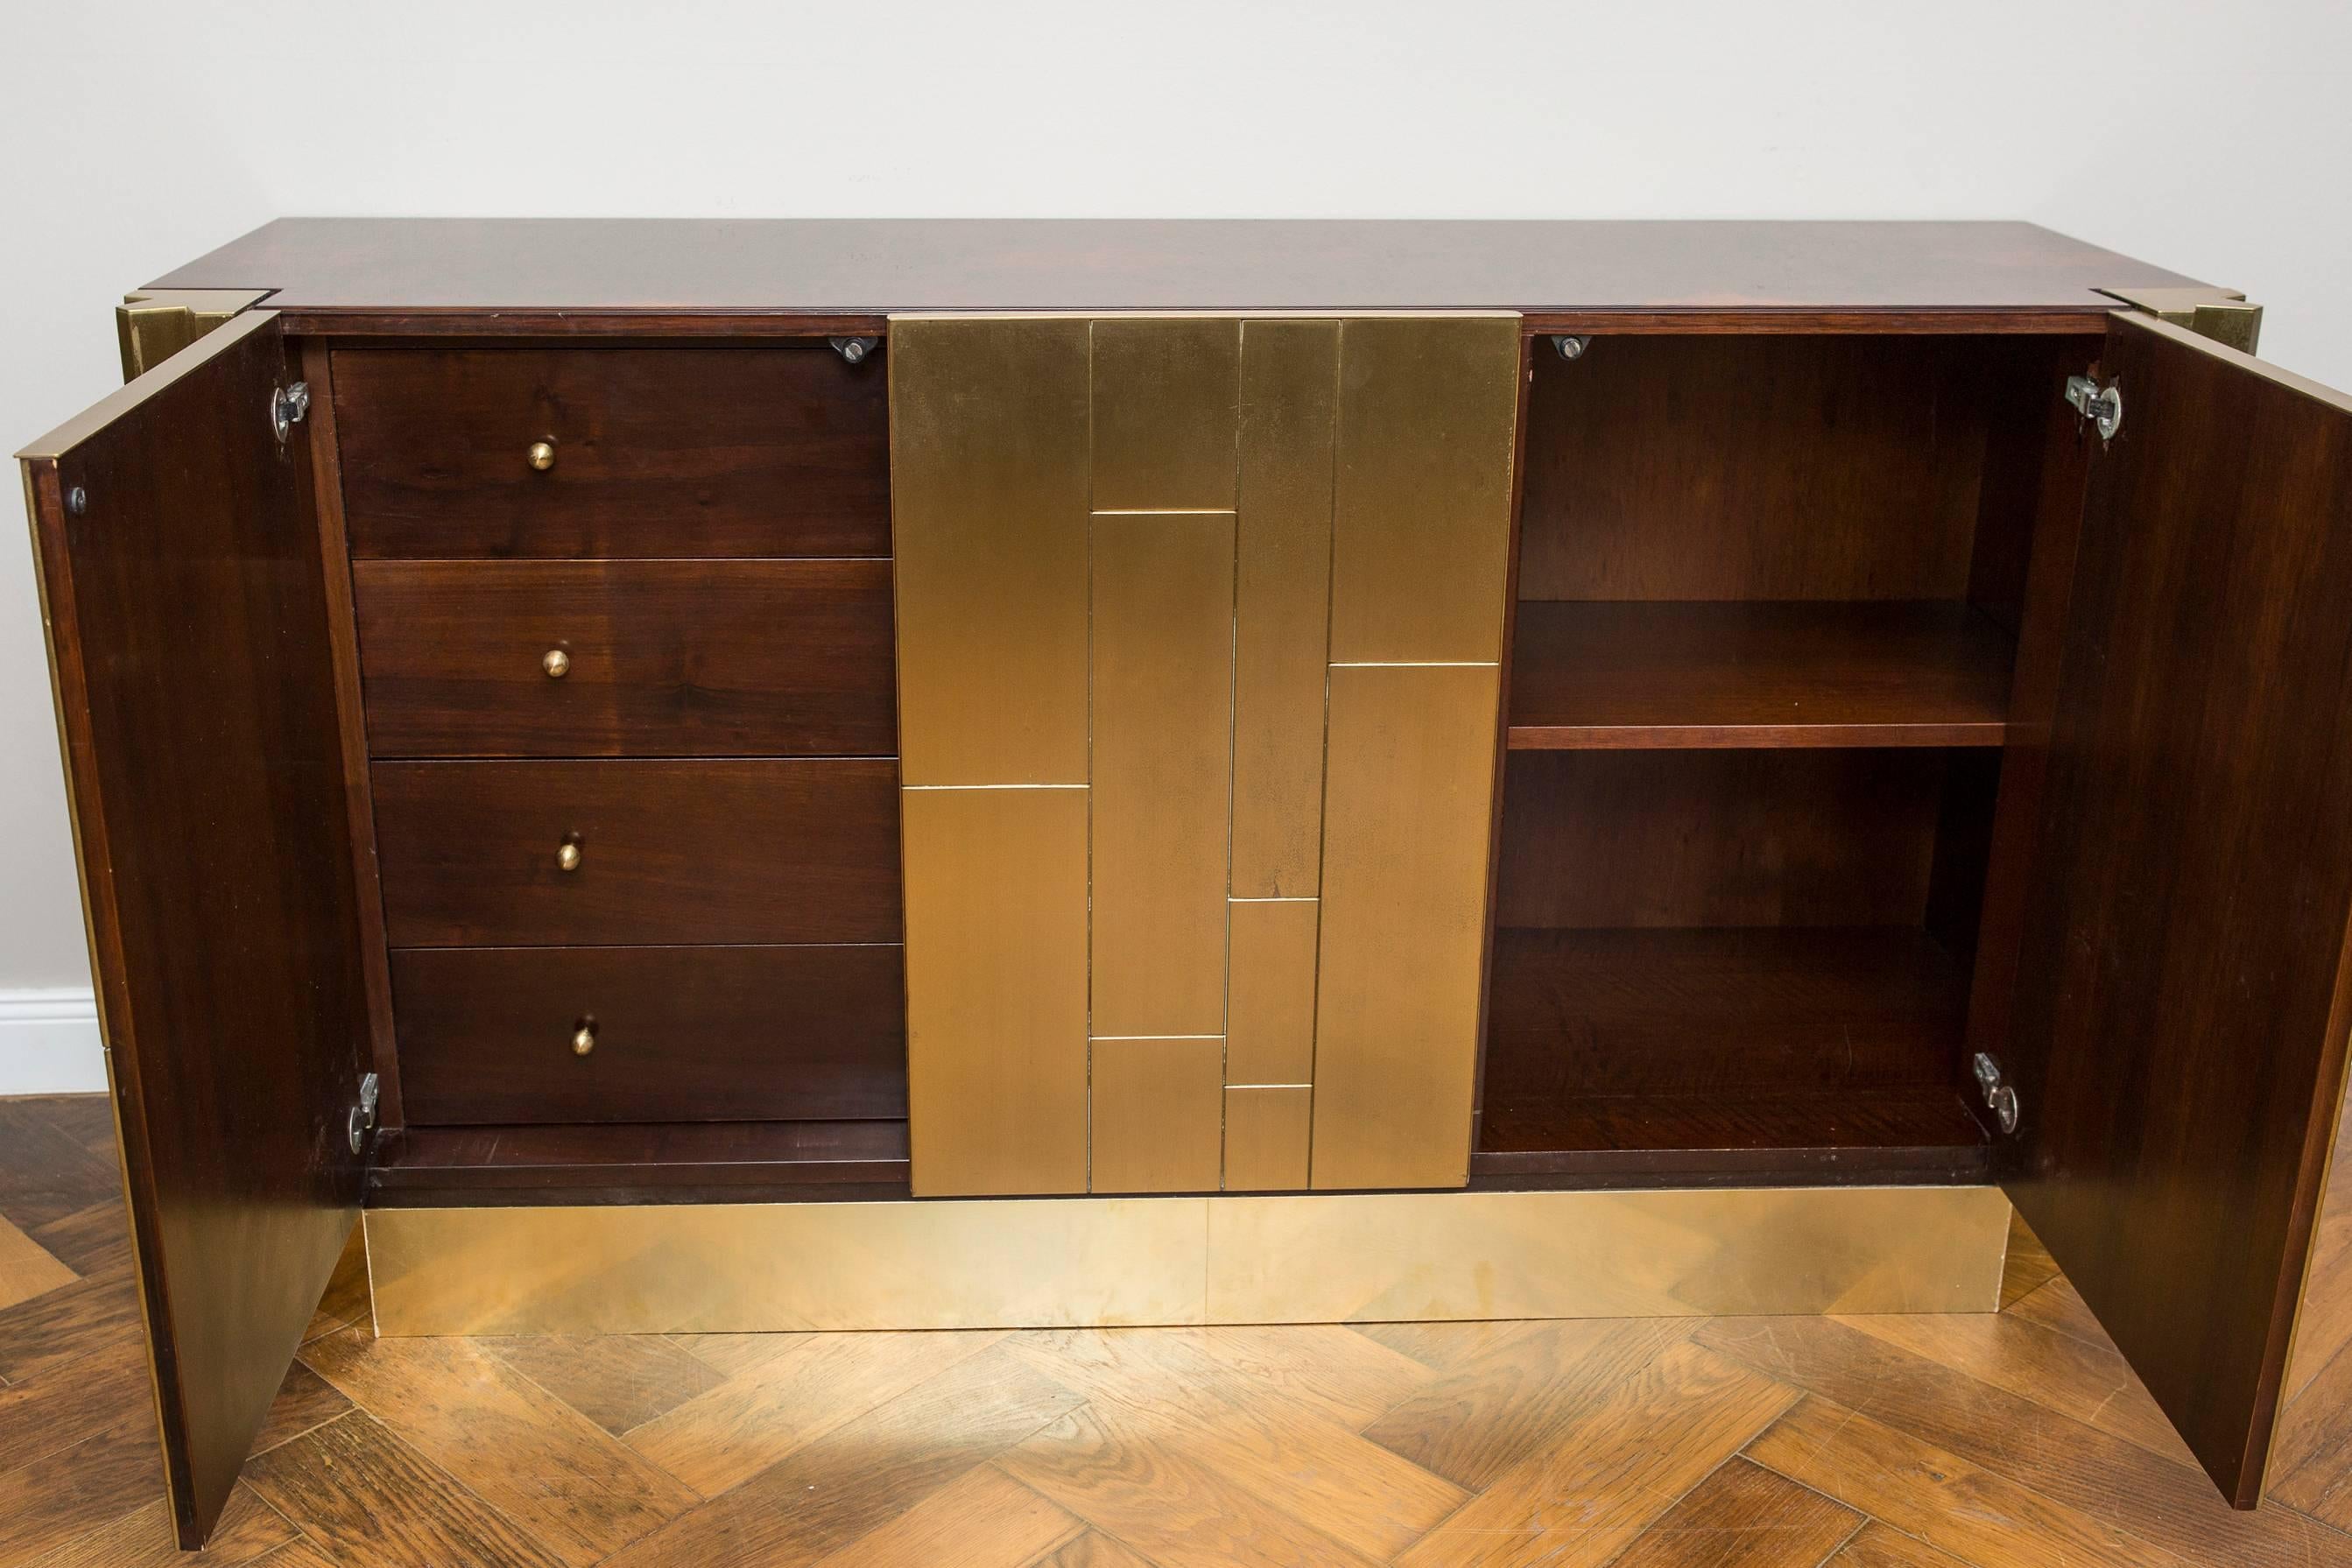 Elegant sideboard by Luciano Frigerio, Italy, circa 1970, Prod. Serie: Louis Radica, brass, rootwood veneer, wood. Two doors, inside four drawers and two shelfs.
Bibl.: Calalogo di produzione Frigerio anni ´70.